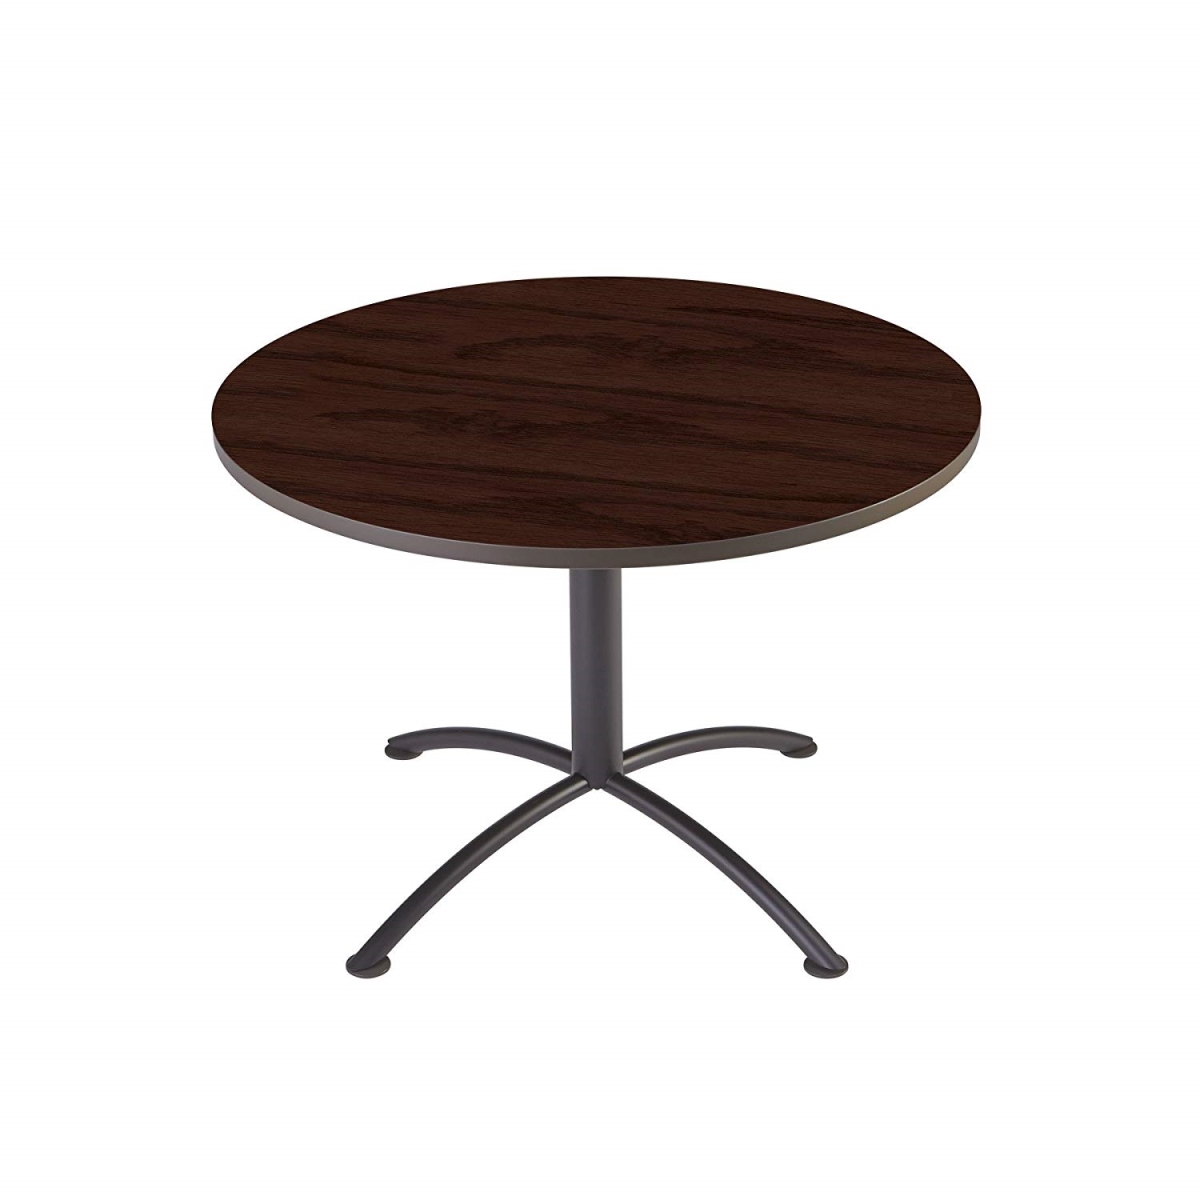 69738 42 Dia. X 29 In. Iland Table, Contour With Round Seated Style - Mahogany & Black